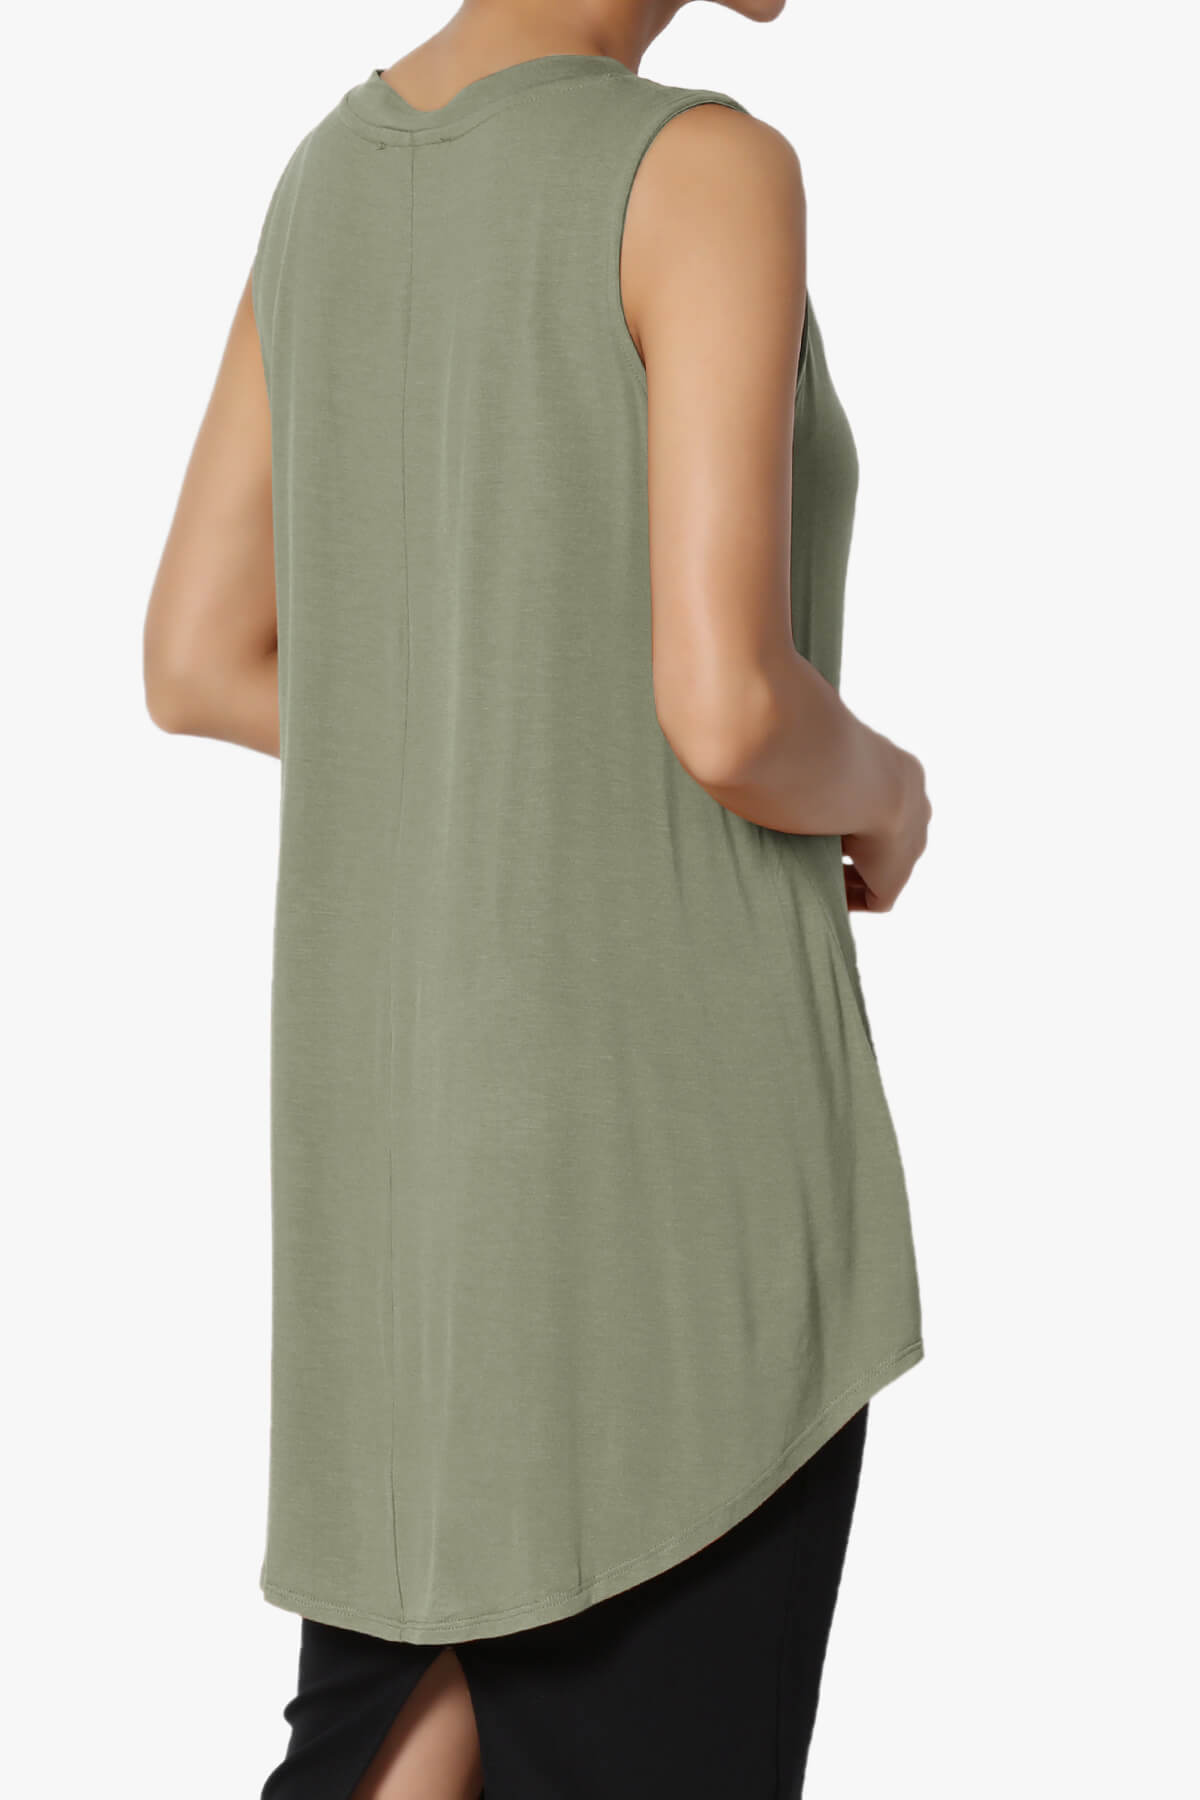 Load image into Gallery viewer, Myles Sleeveless V-Neck Luxe Jersey Top DUSTY OLIVE_4
